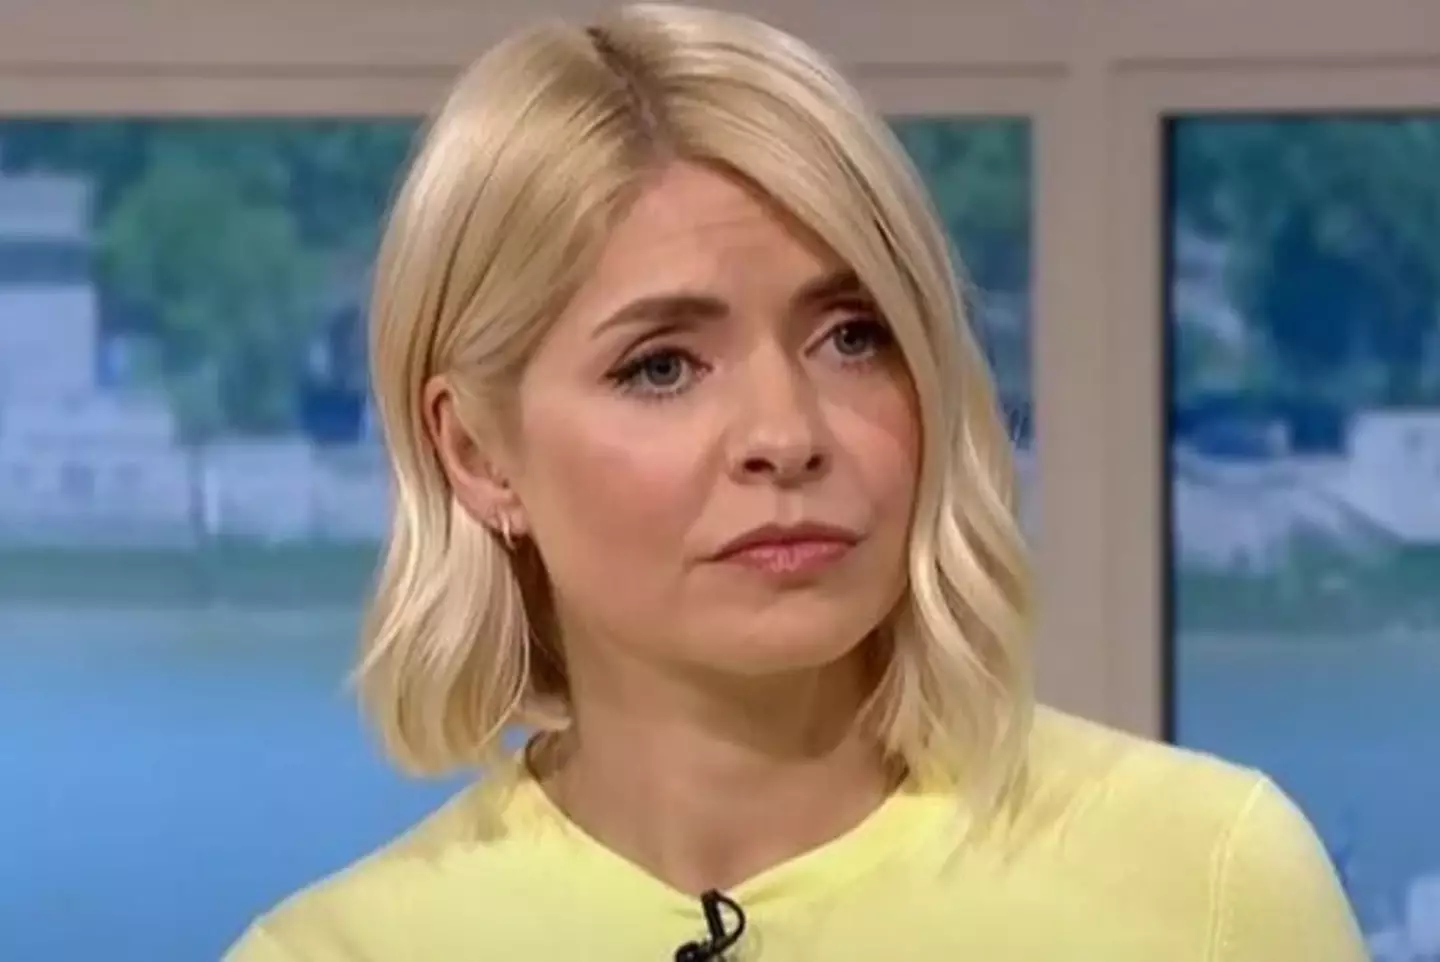 Holly Willoughby addressed Phillip's departure on This Morning today.